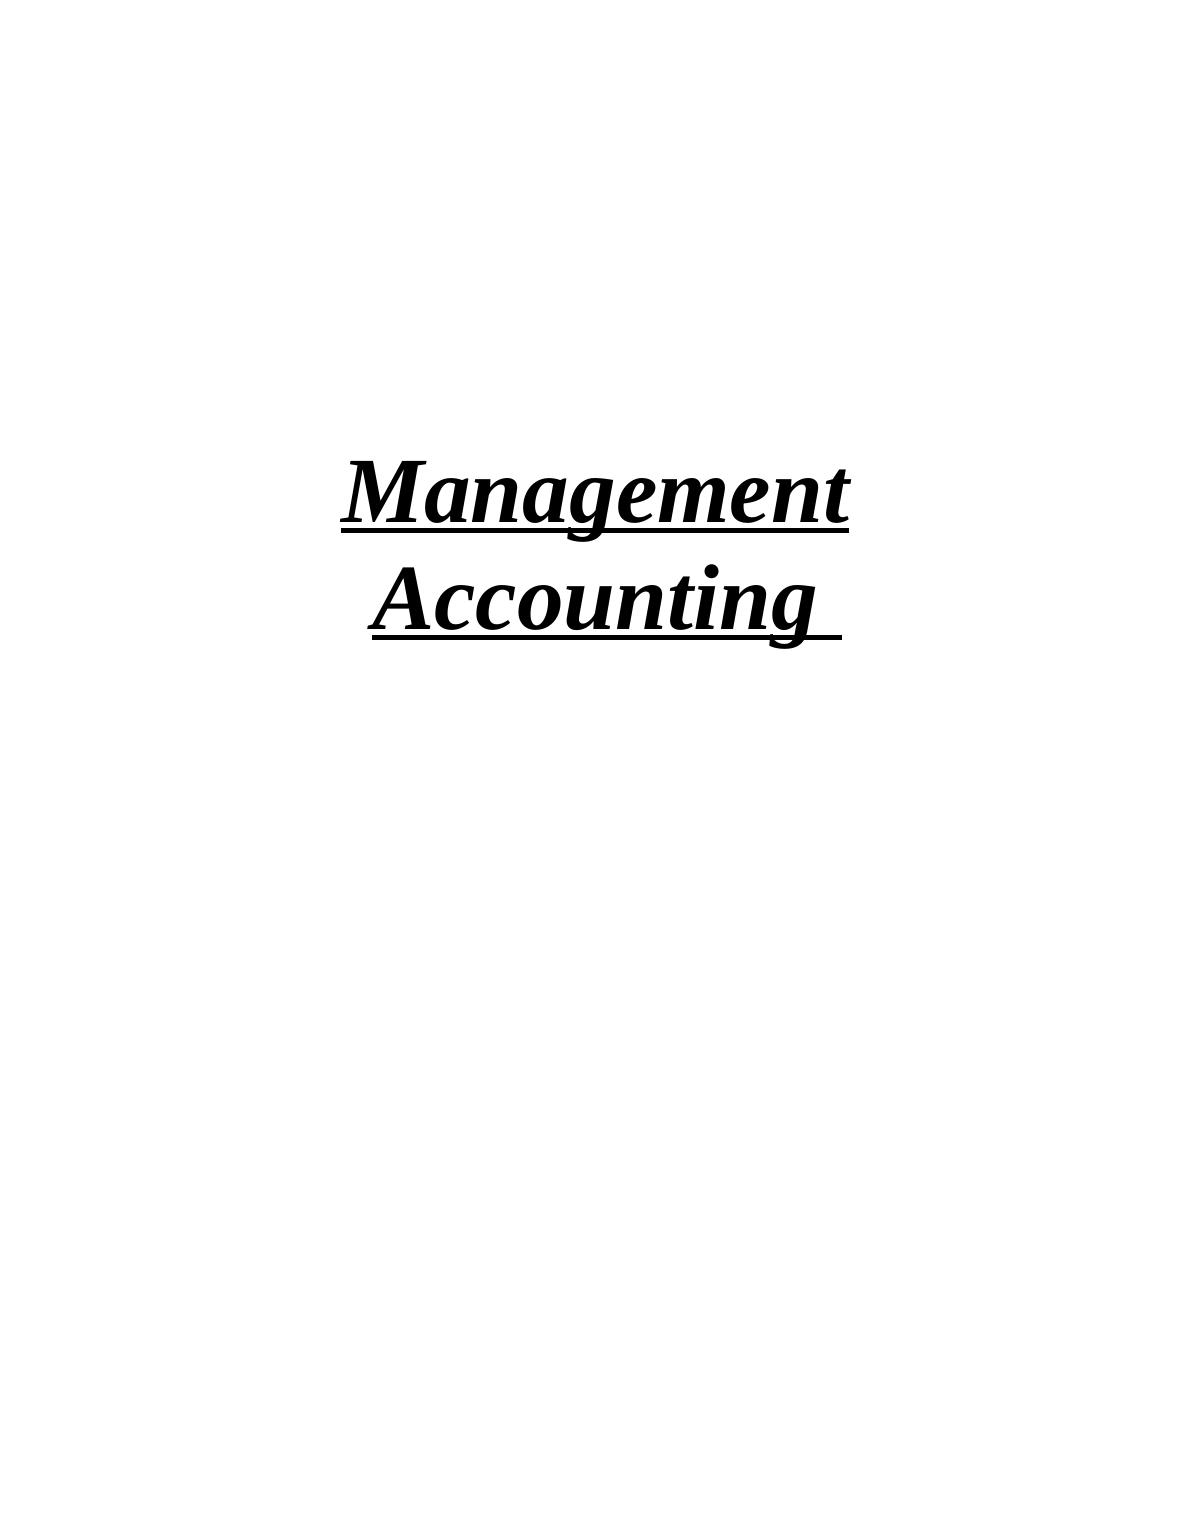 Management Accounting Process - Doc_1